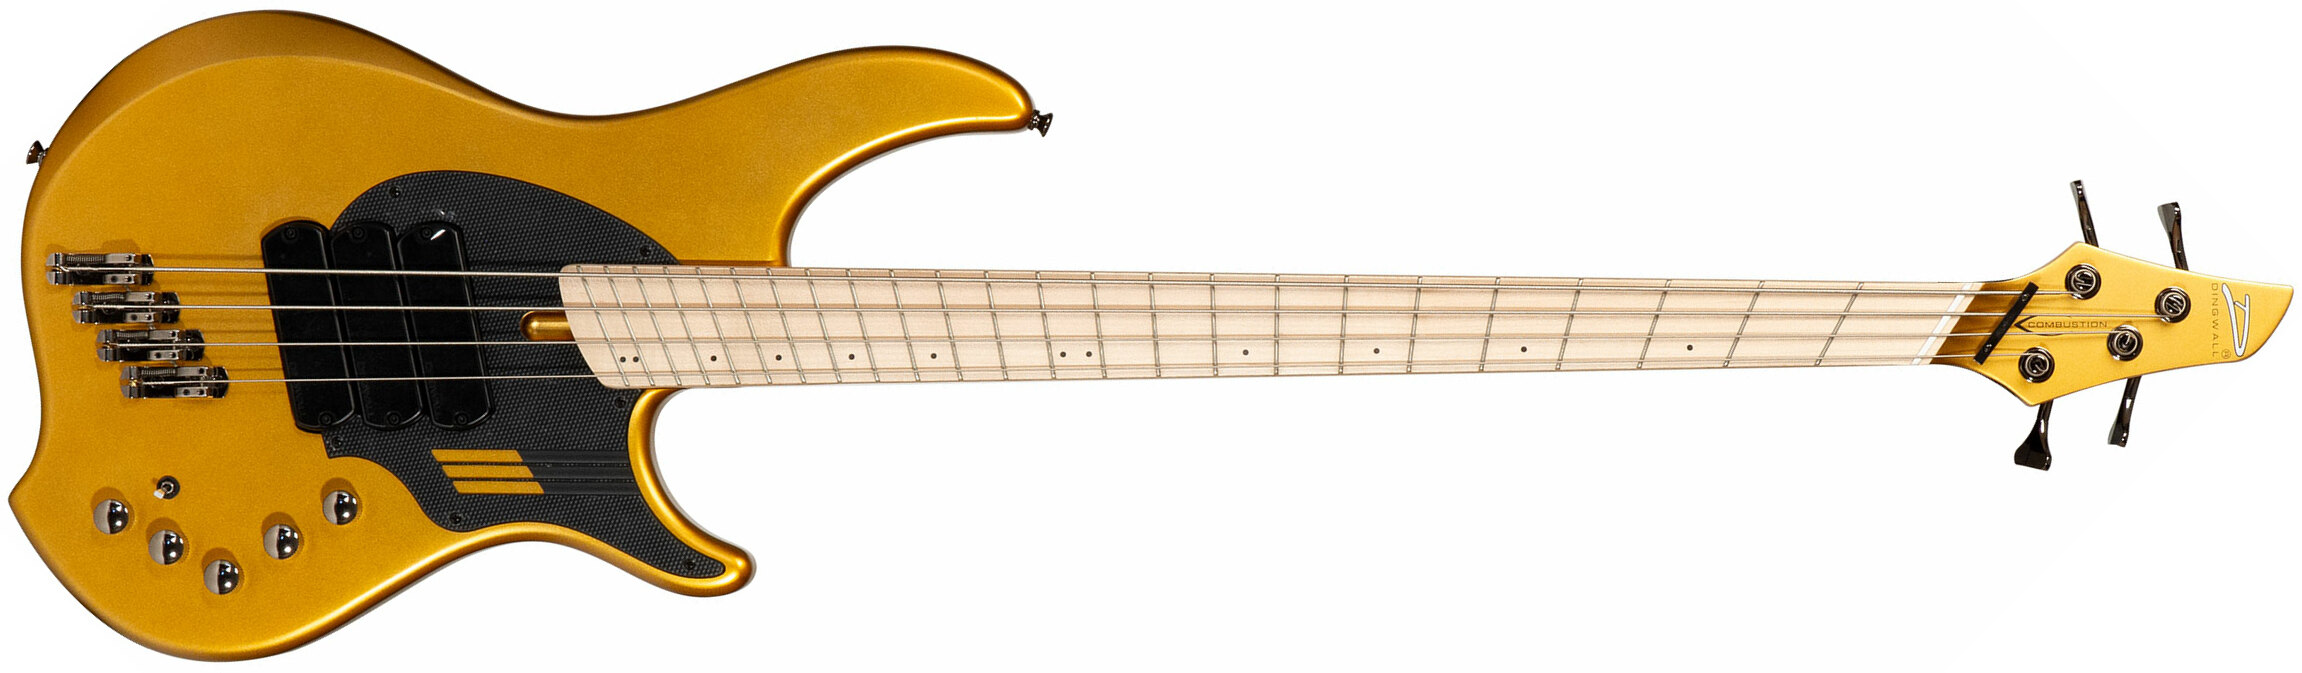 Dingwall Adam Nolly Getgood Ng3 4c Signature 3pu Active Mn - Gold Matte - Solid body elektrische bas - Main picture